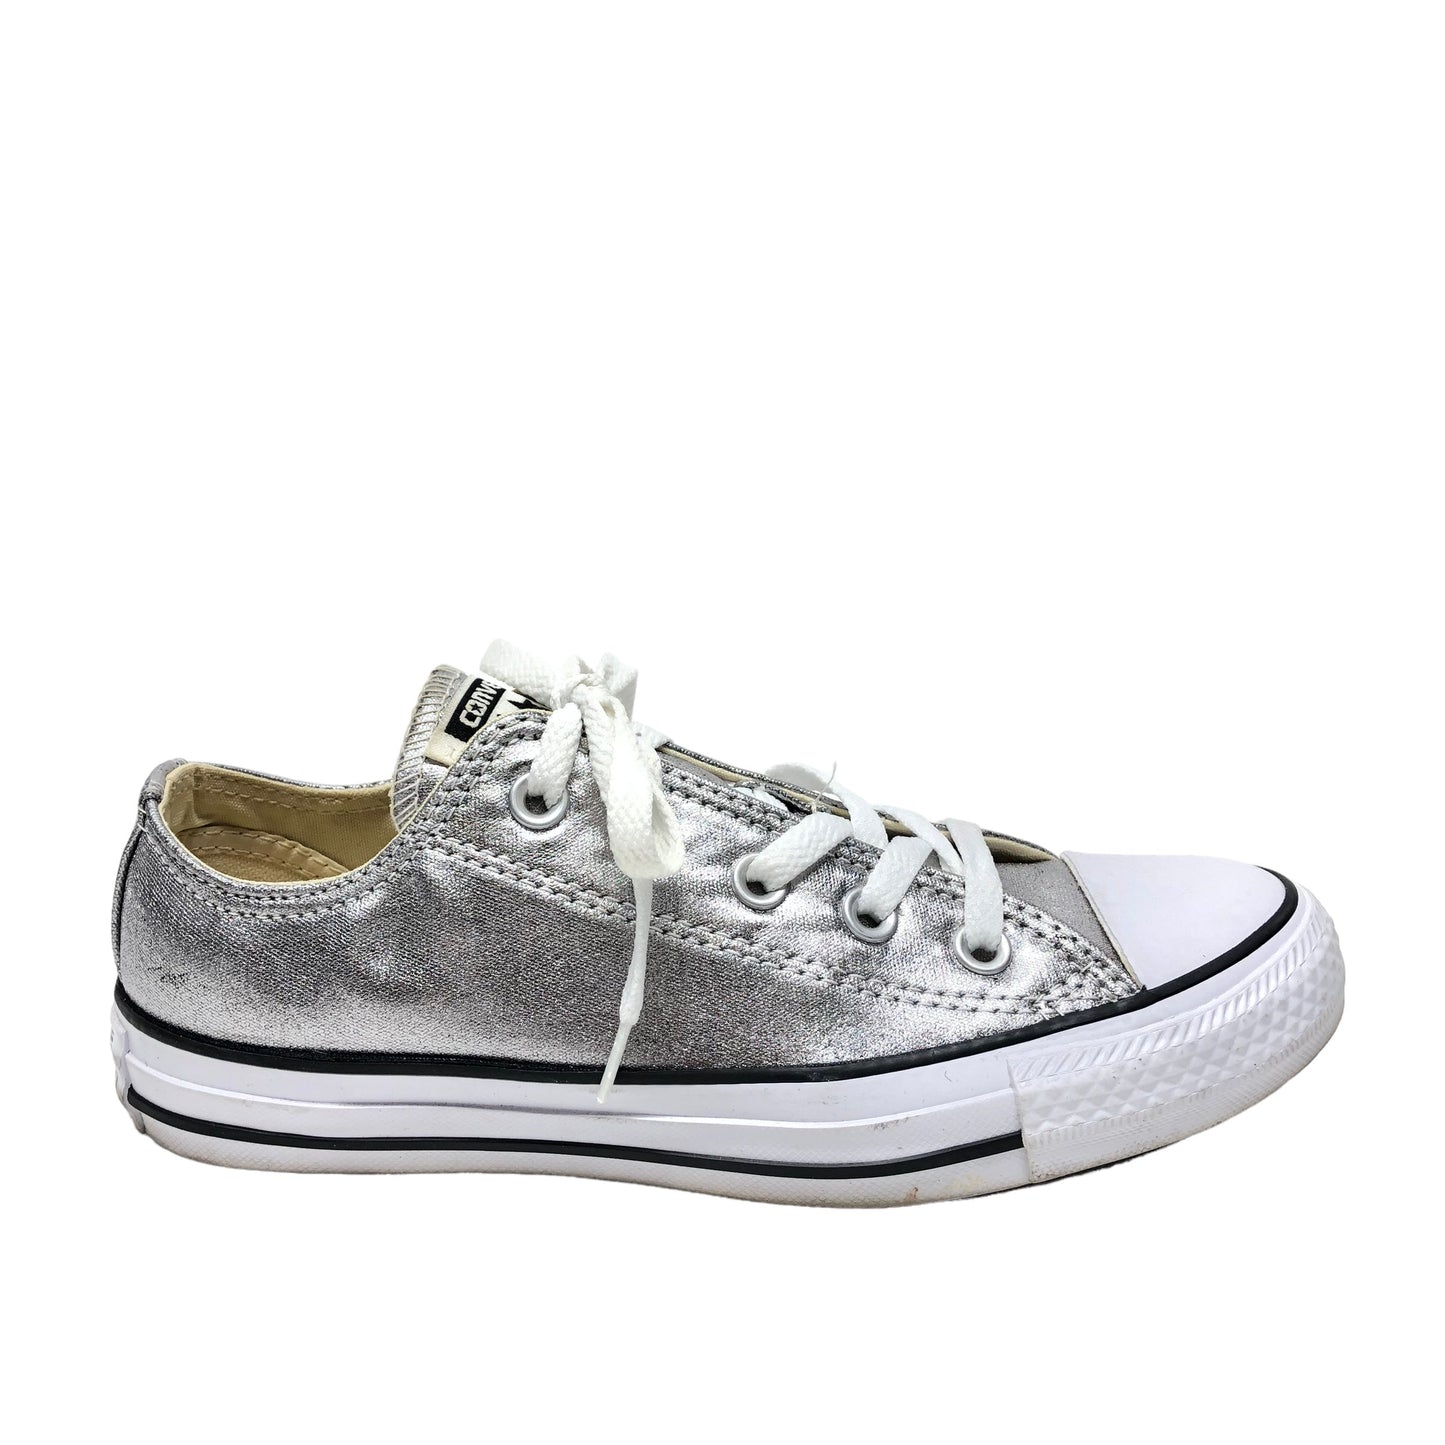 Silver Shoes Sneakers Converse, Size 6